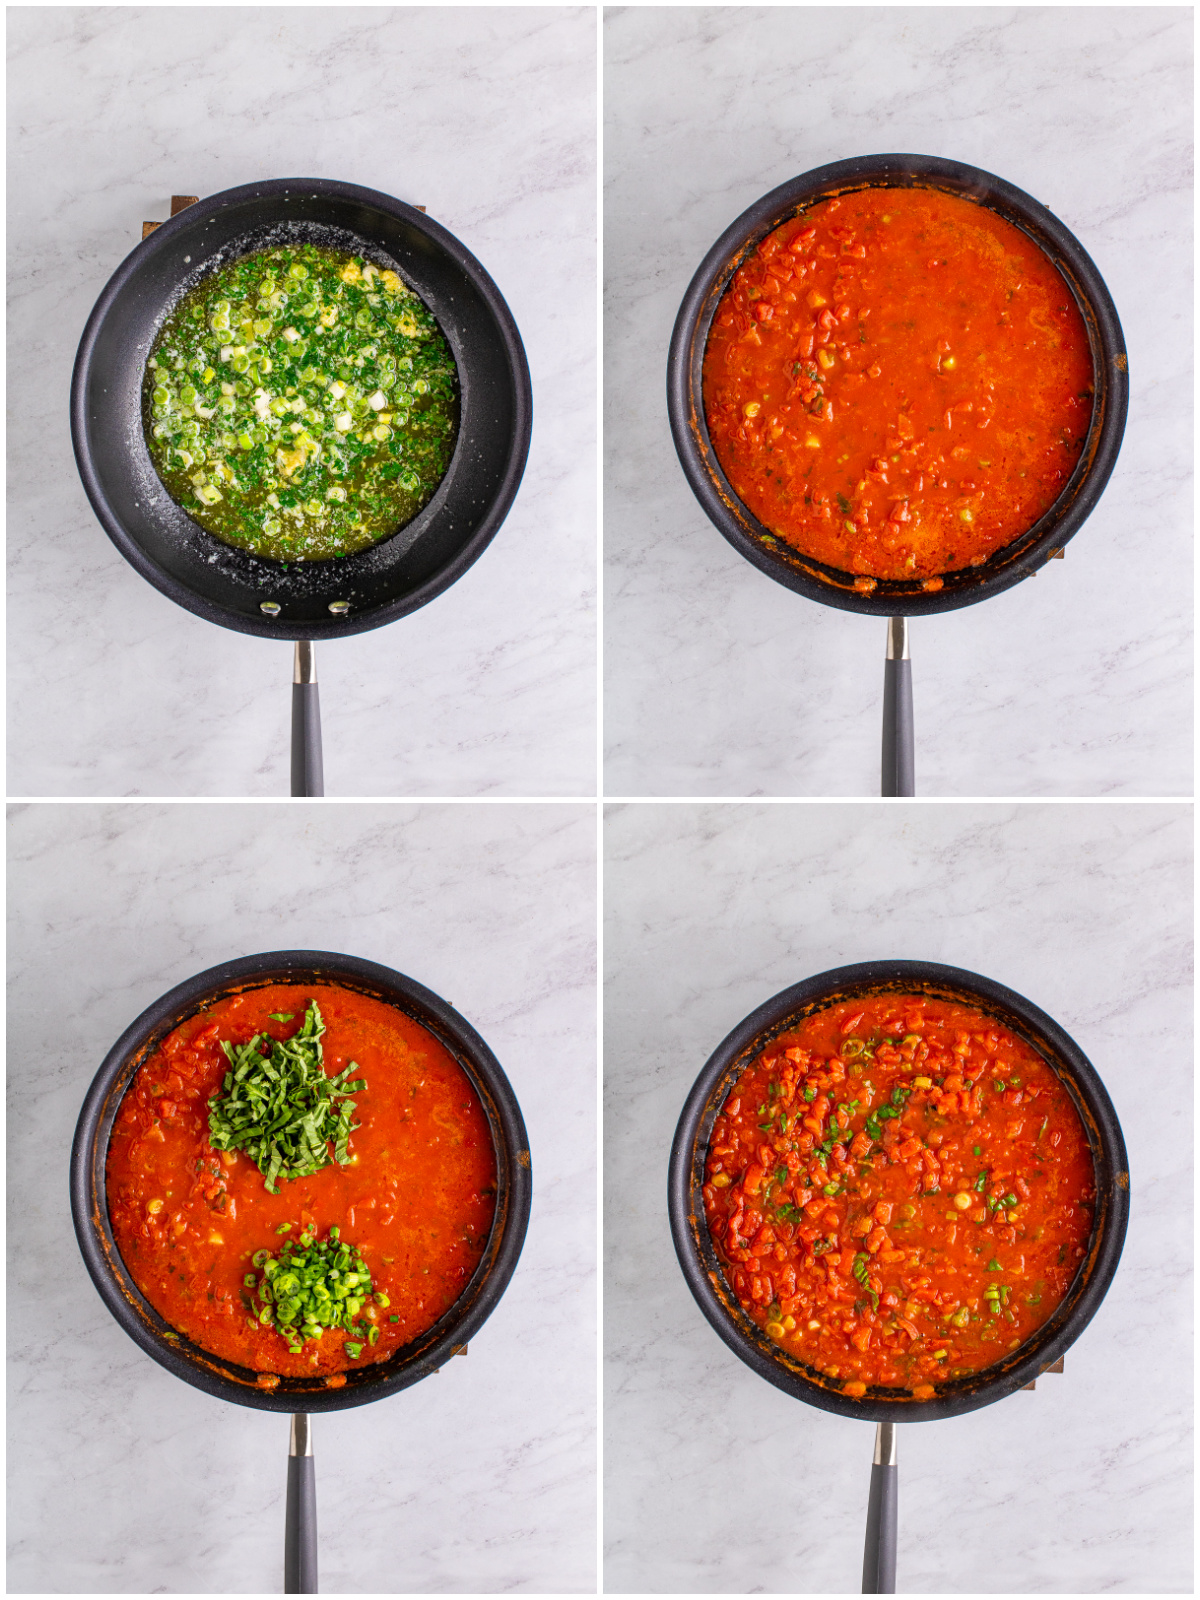 Step by step photos on how to make Tomato Basil Sauce.